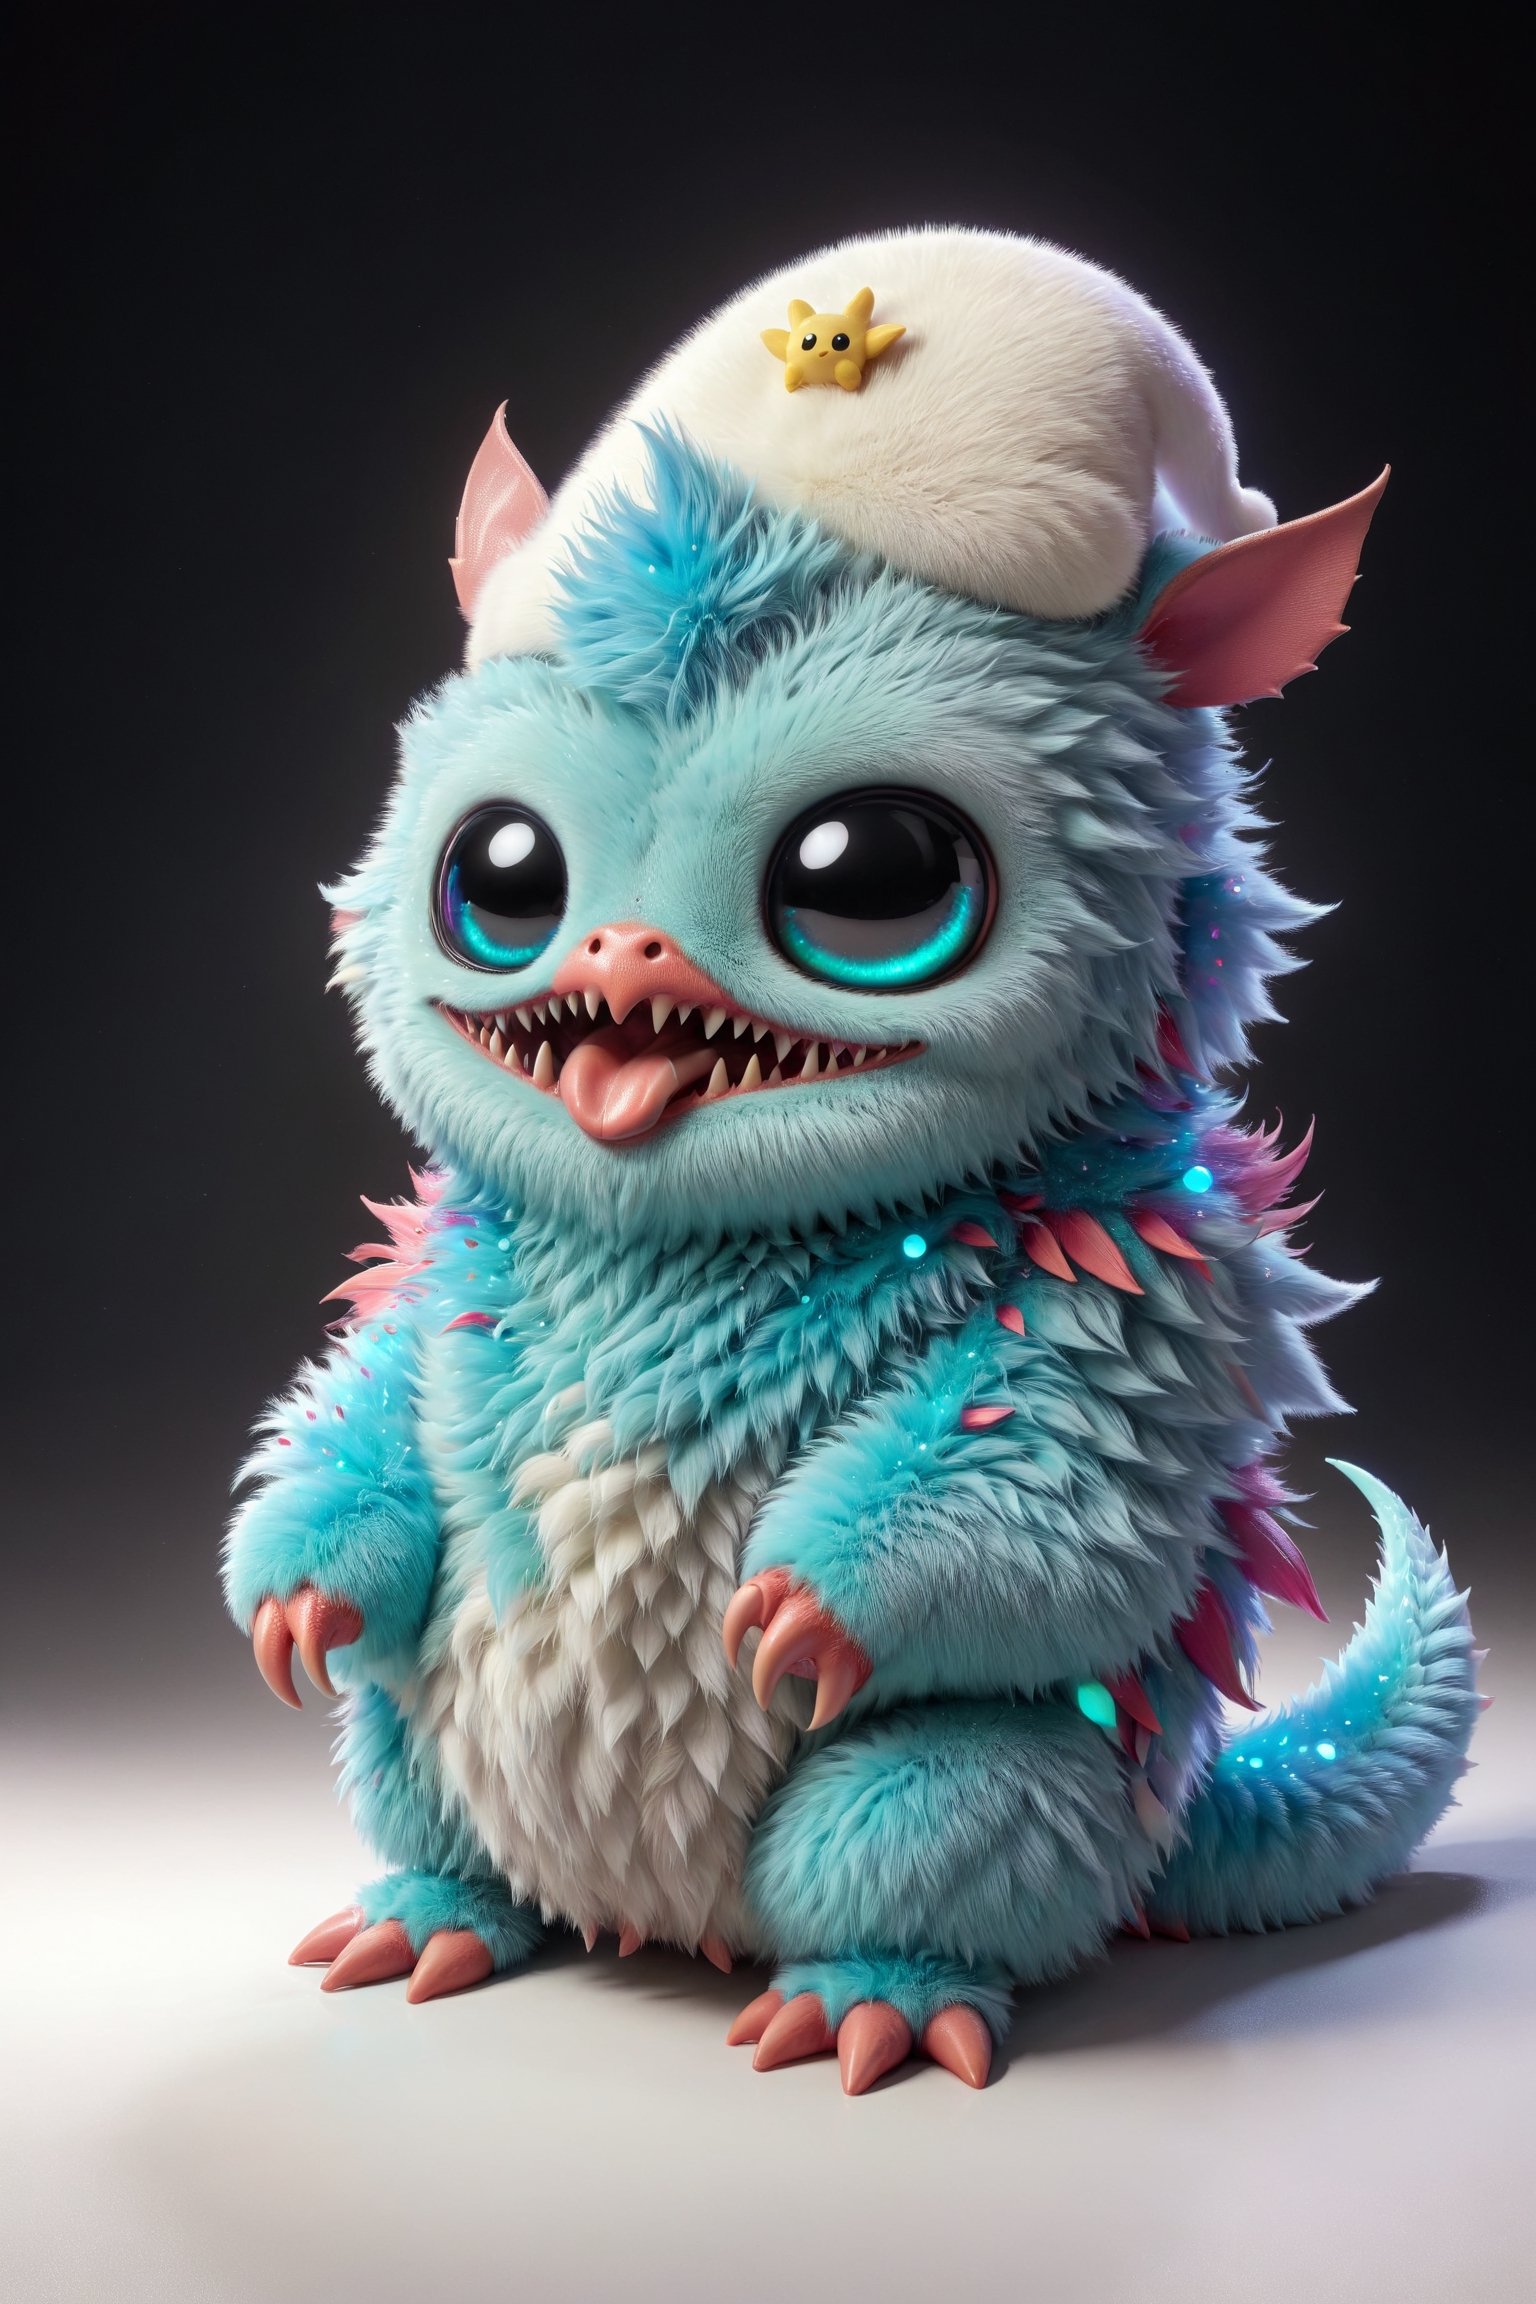 A cute alien creature, colourful fur, large reflective eyes like dark pools, plain background, 3d_model, cinematic lighting, rim lighting, kawaii, pokemon, t-shirt character, white background, cutout, bioluminiscence, chromatophore
,ral-chrcrts, duck billed platypus, furry dragon, huge alien_penis, large mouth filled with hundreds of sharp scary teeth